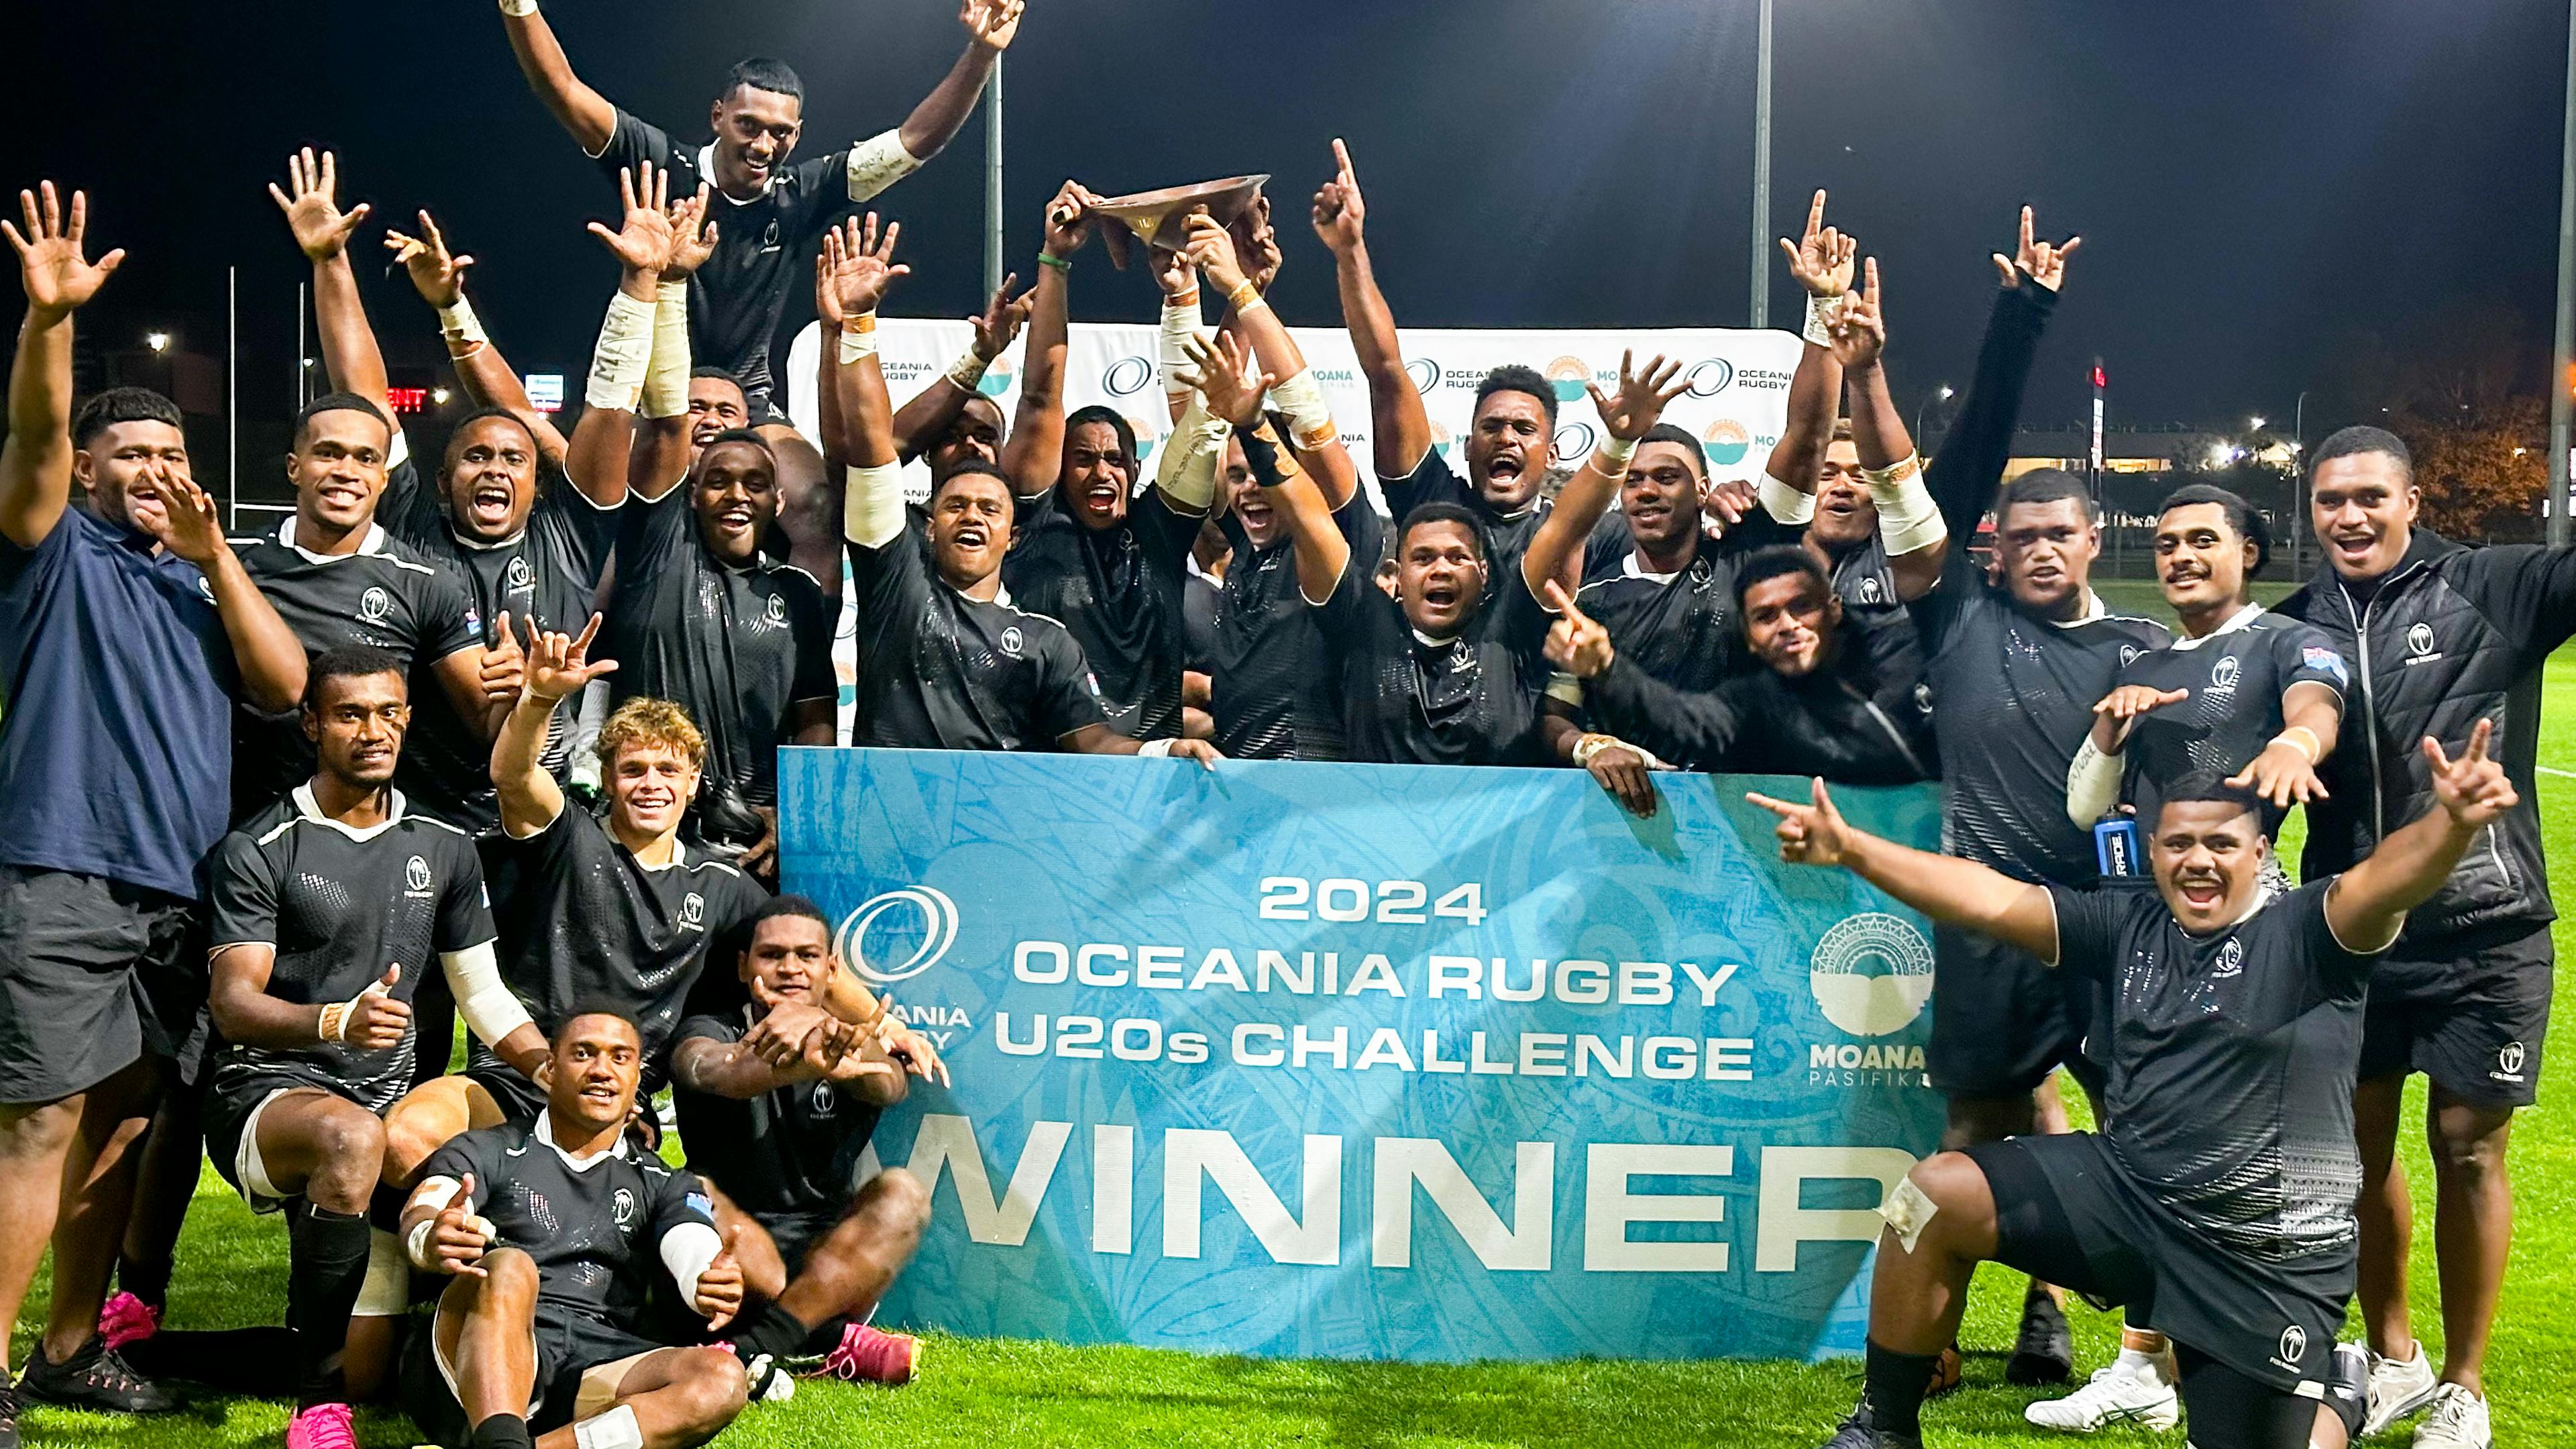 Oceania Rugby Competition Committee